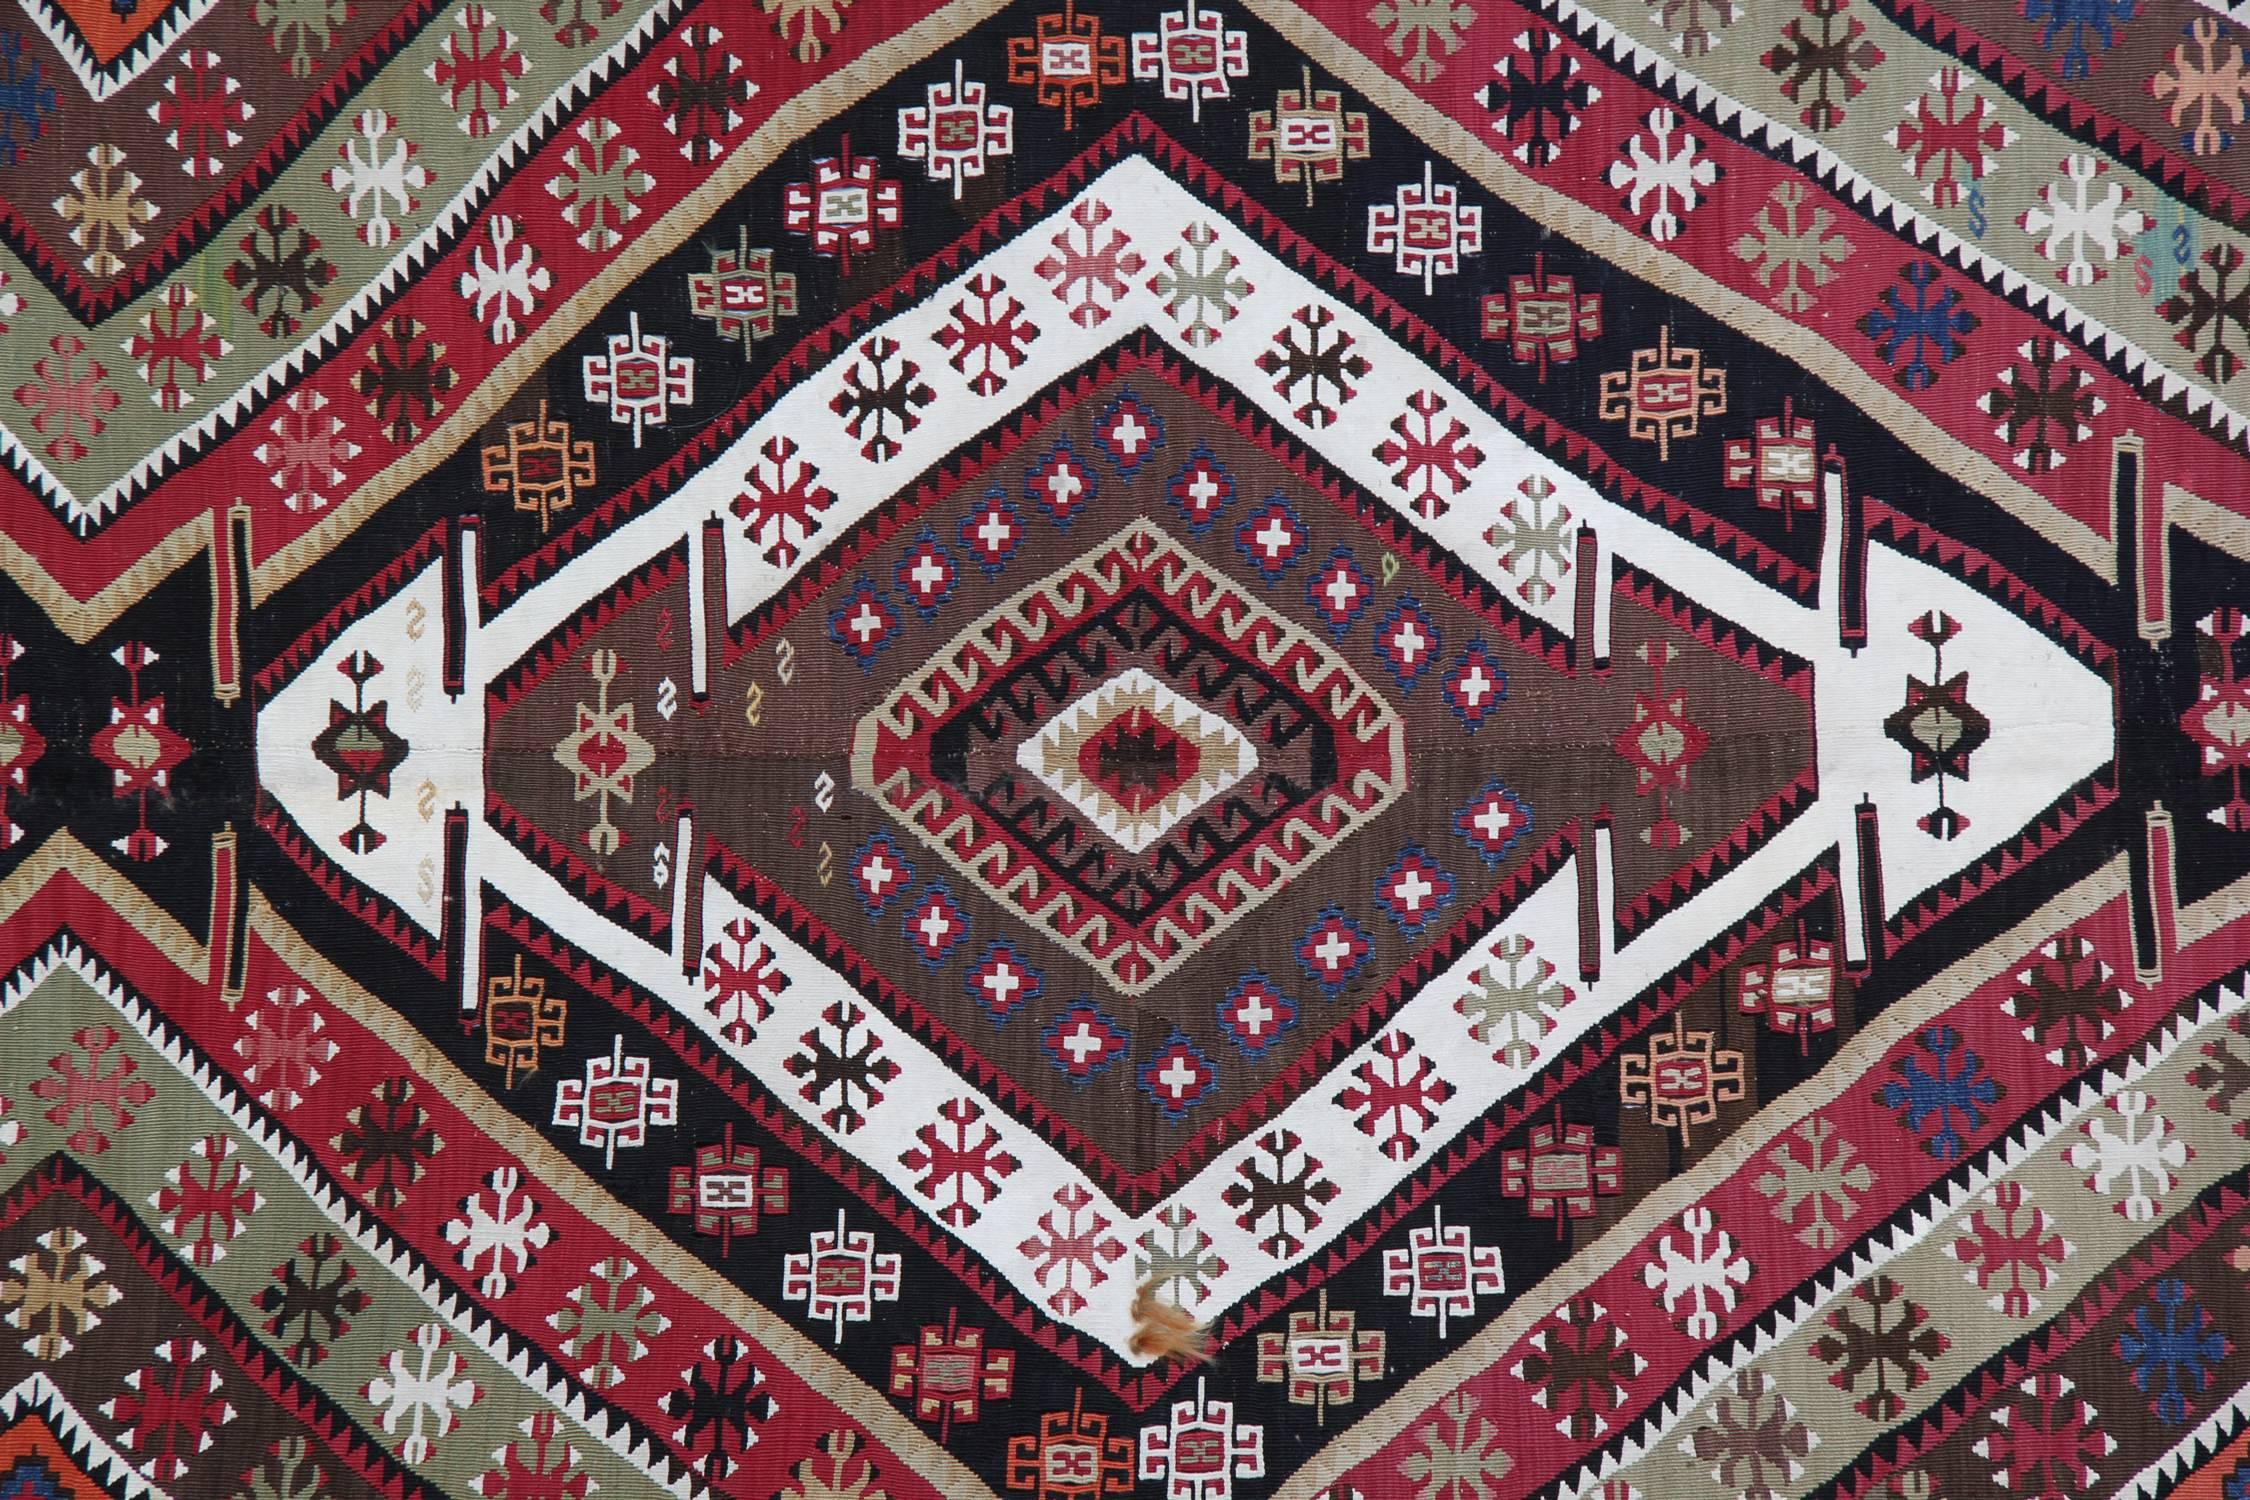 Turkish Runner Kilim Rugs, Antique Rug, Handmade Carpet Oriental Rugs In Excellent Condition For Sale In Hampshire, GB